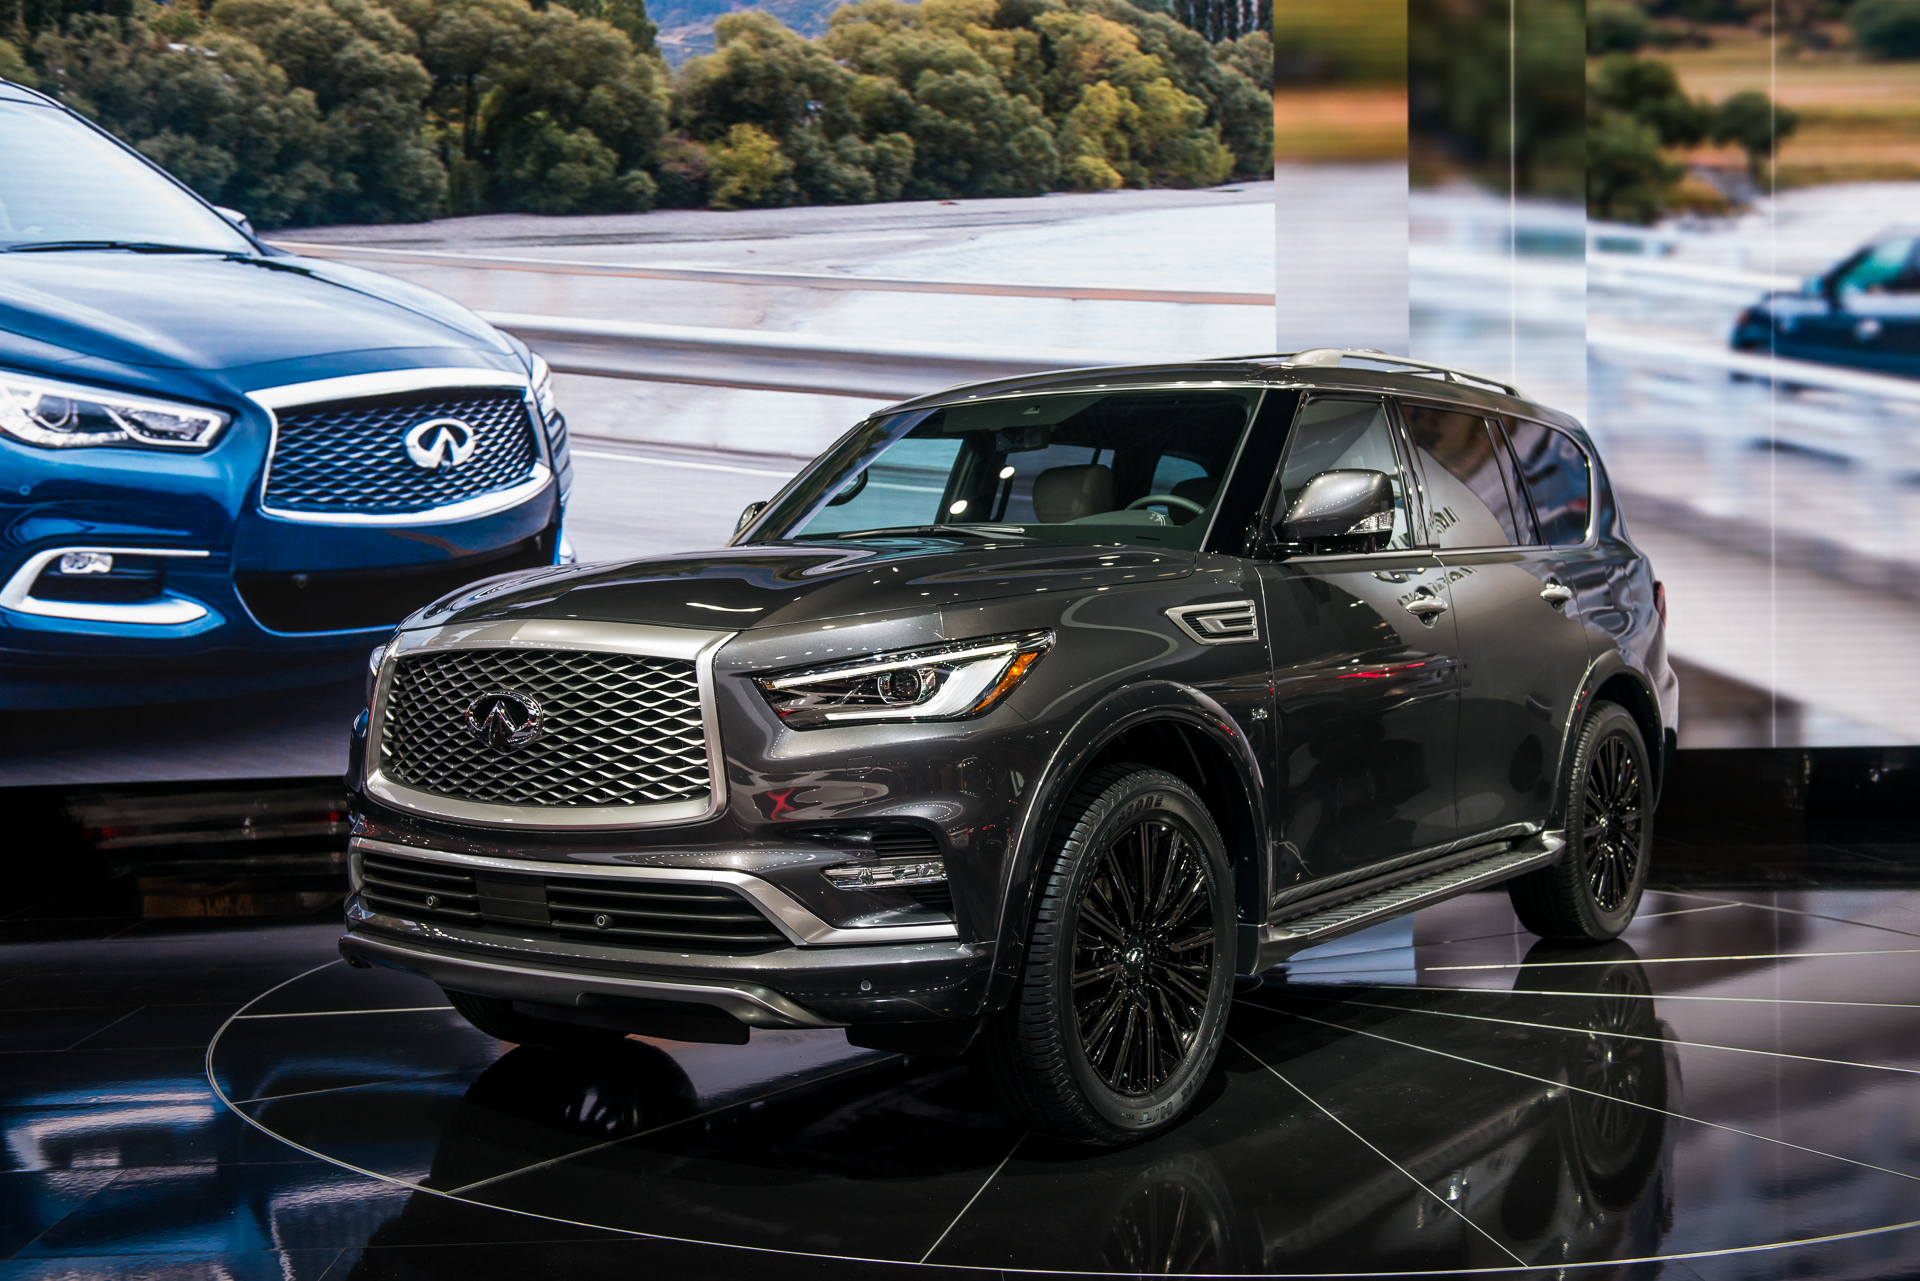 2019 INFINITI QX80 Review, Ratings, Specs, Prices, and Photos - The Car